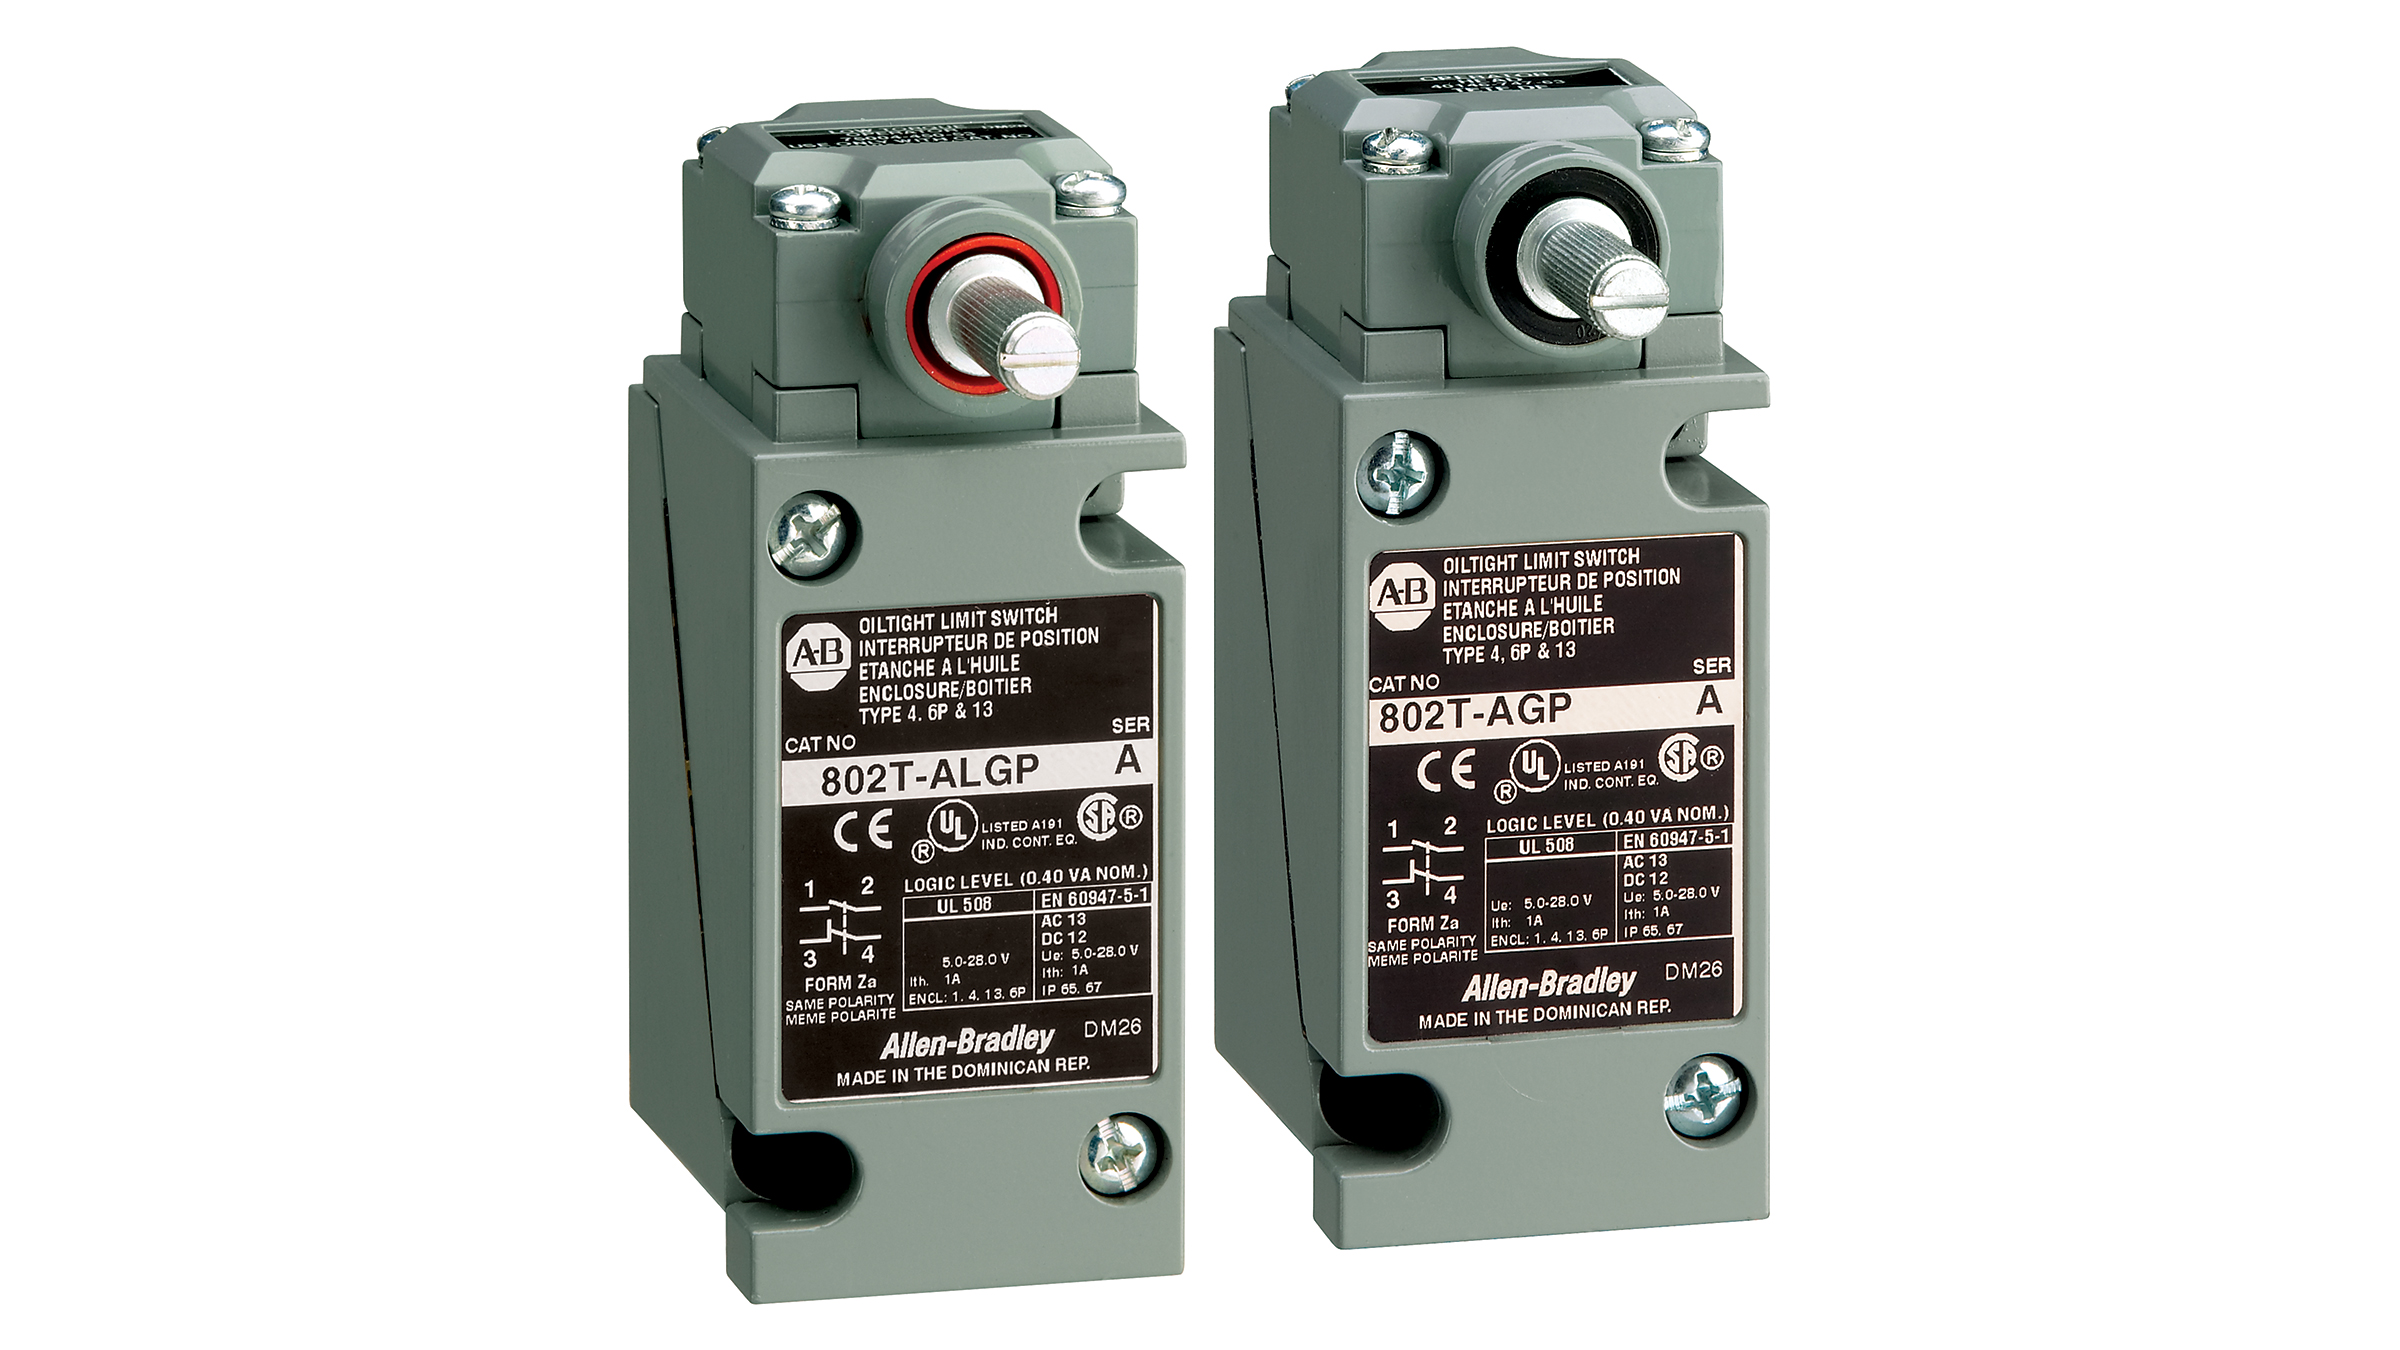 802T-D1UE 802TD1UE UpTo 5 NEW at MostElectric 